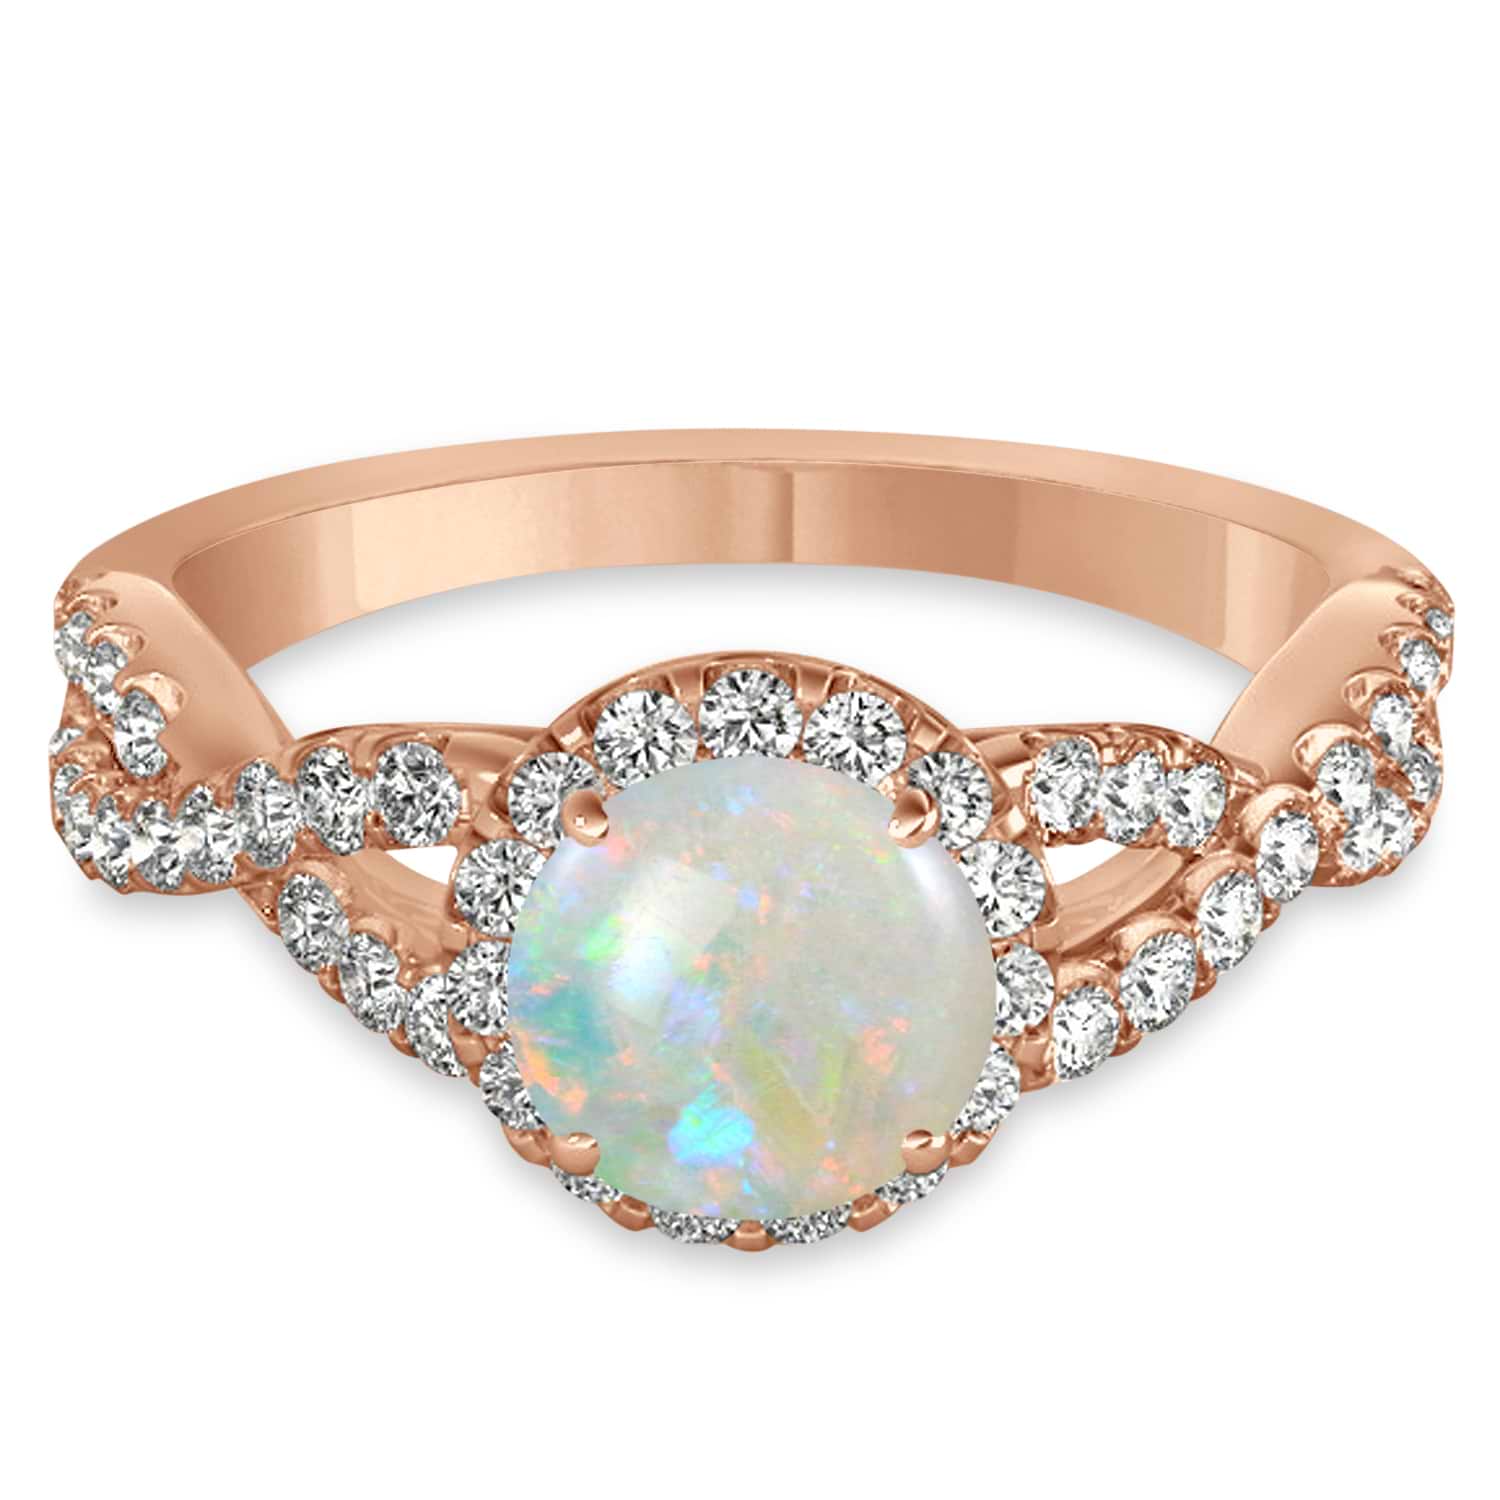 Opal & Diamond Twisted Engagement Ring 14k Rose Gold 1.07ct